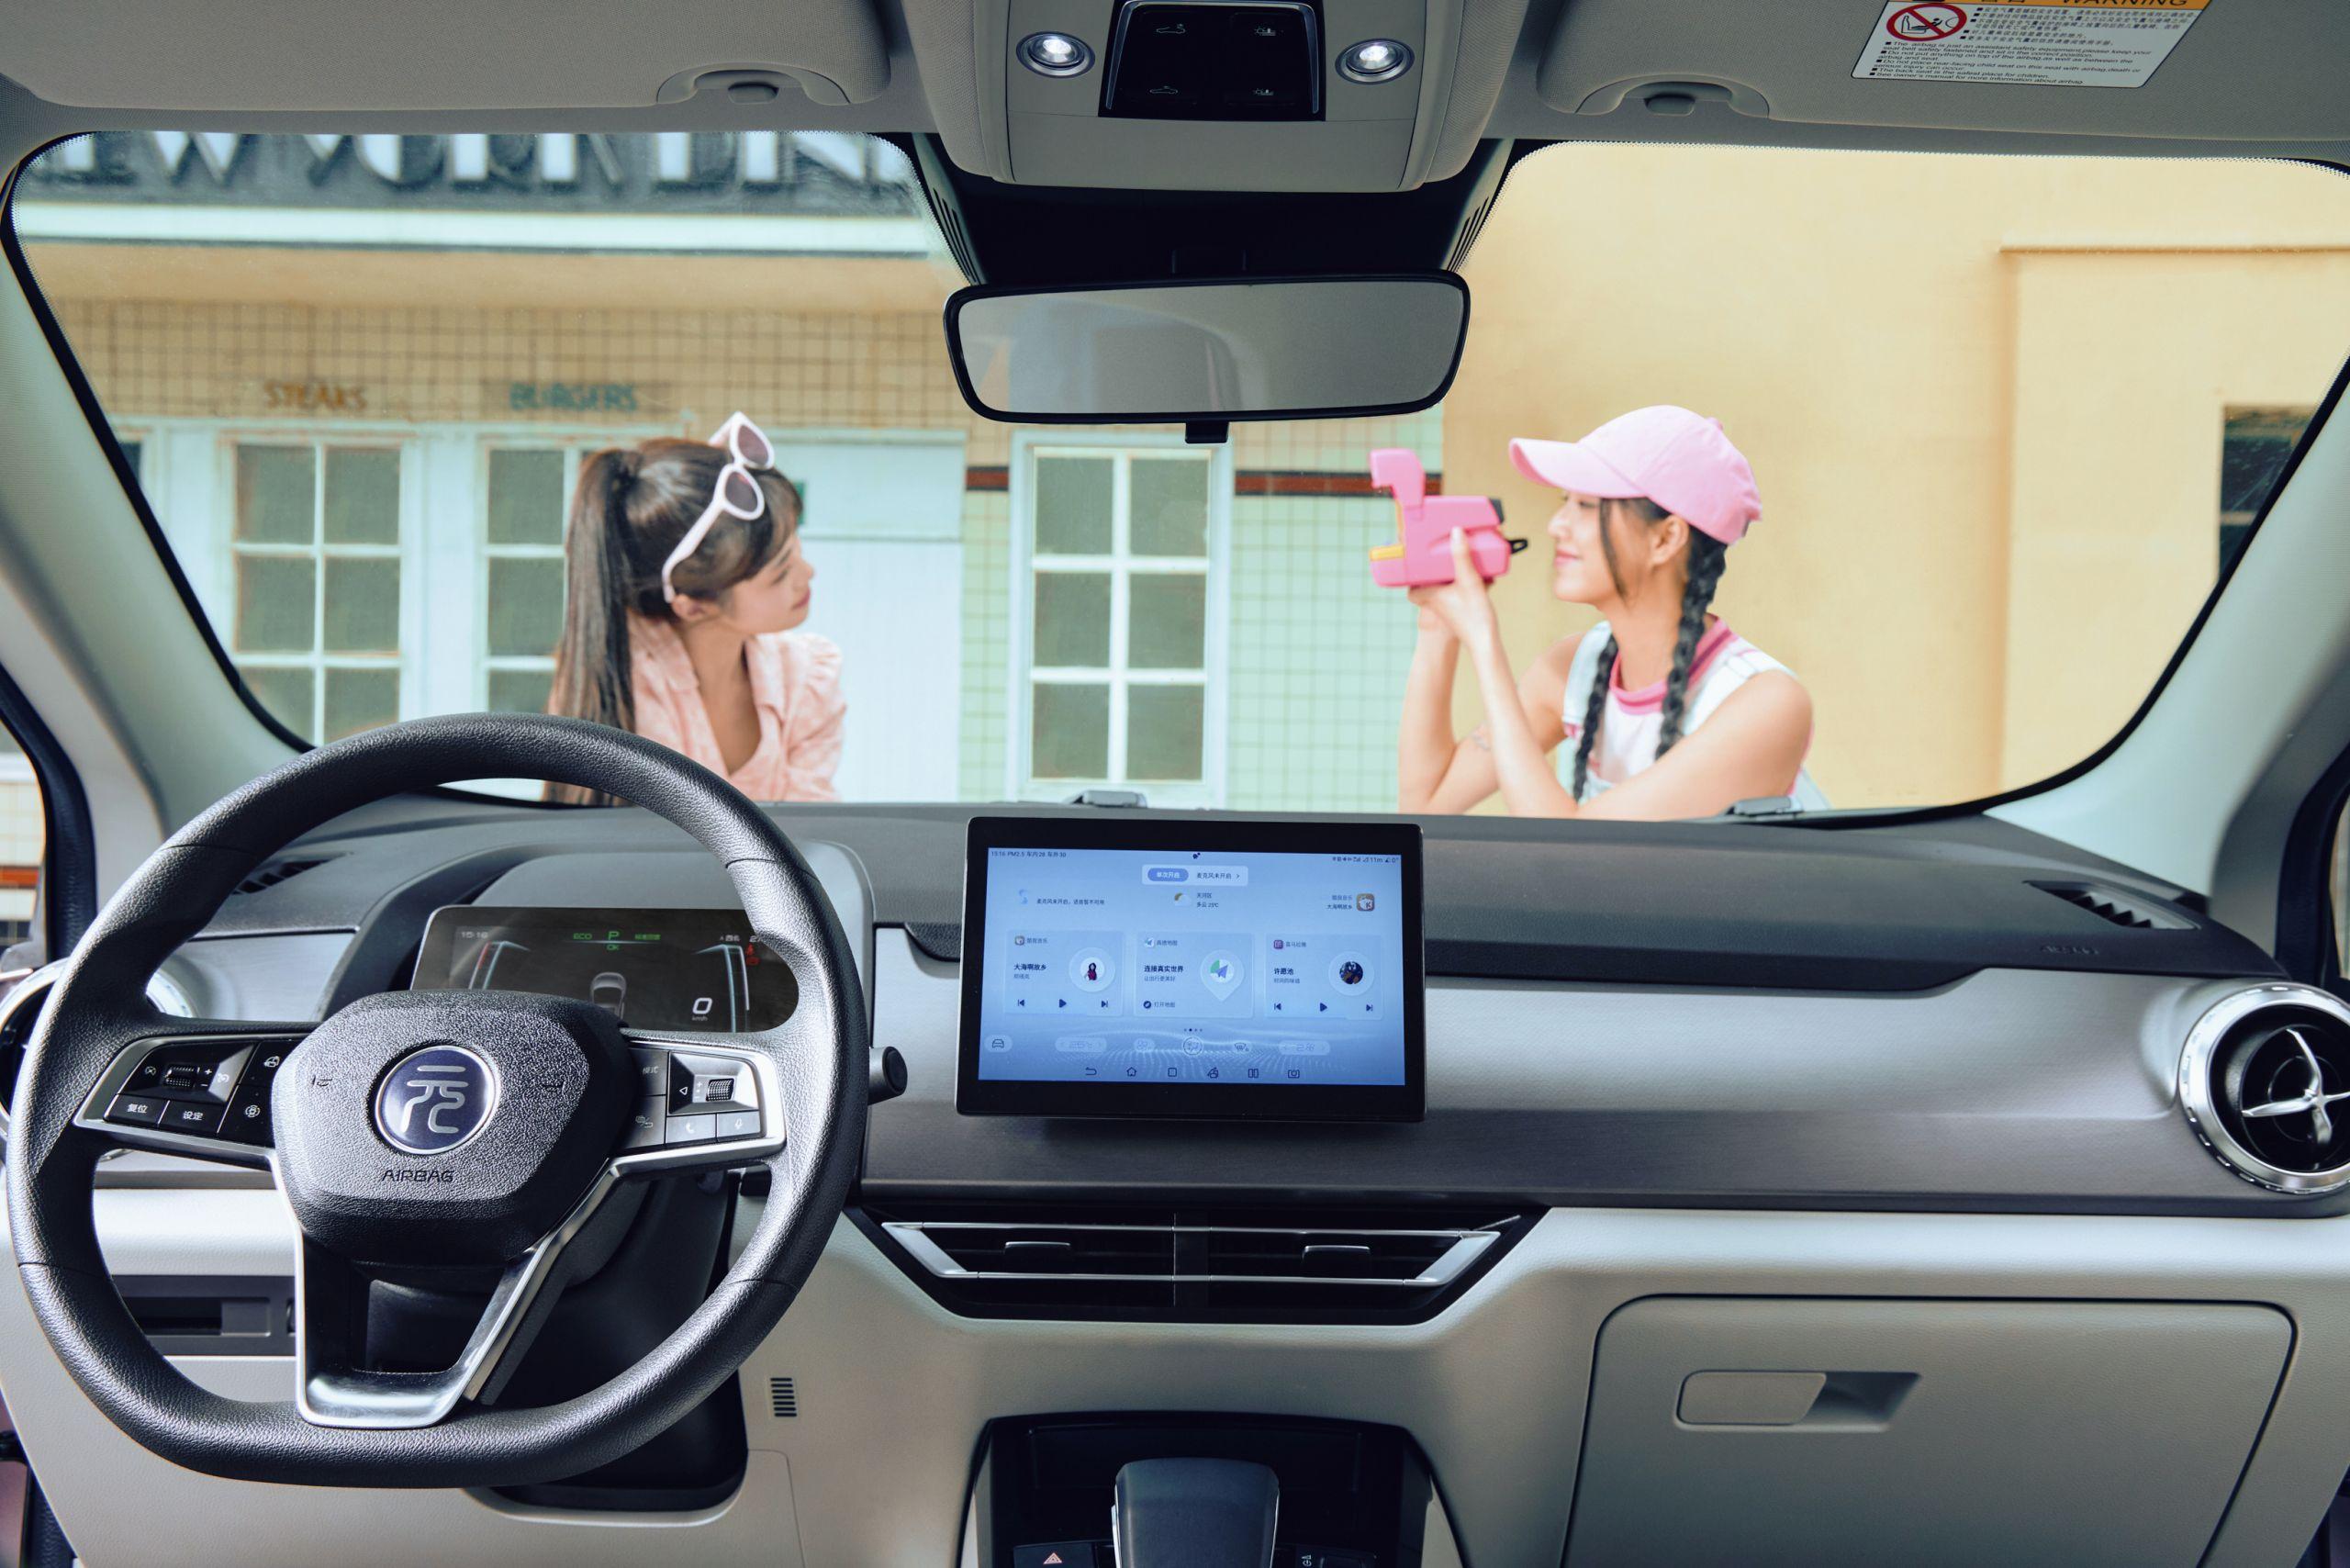 2023-byd-yuan-pro-infotainment-display